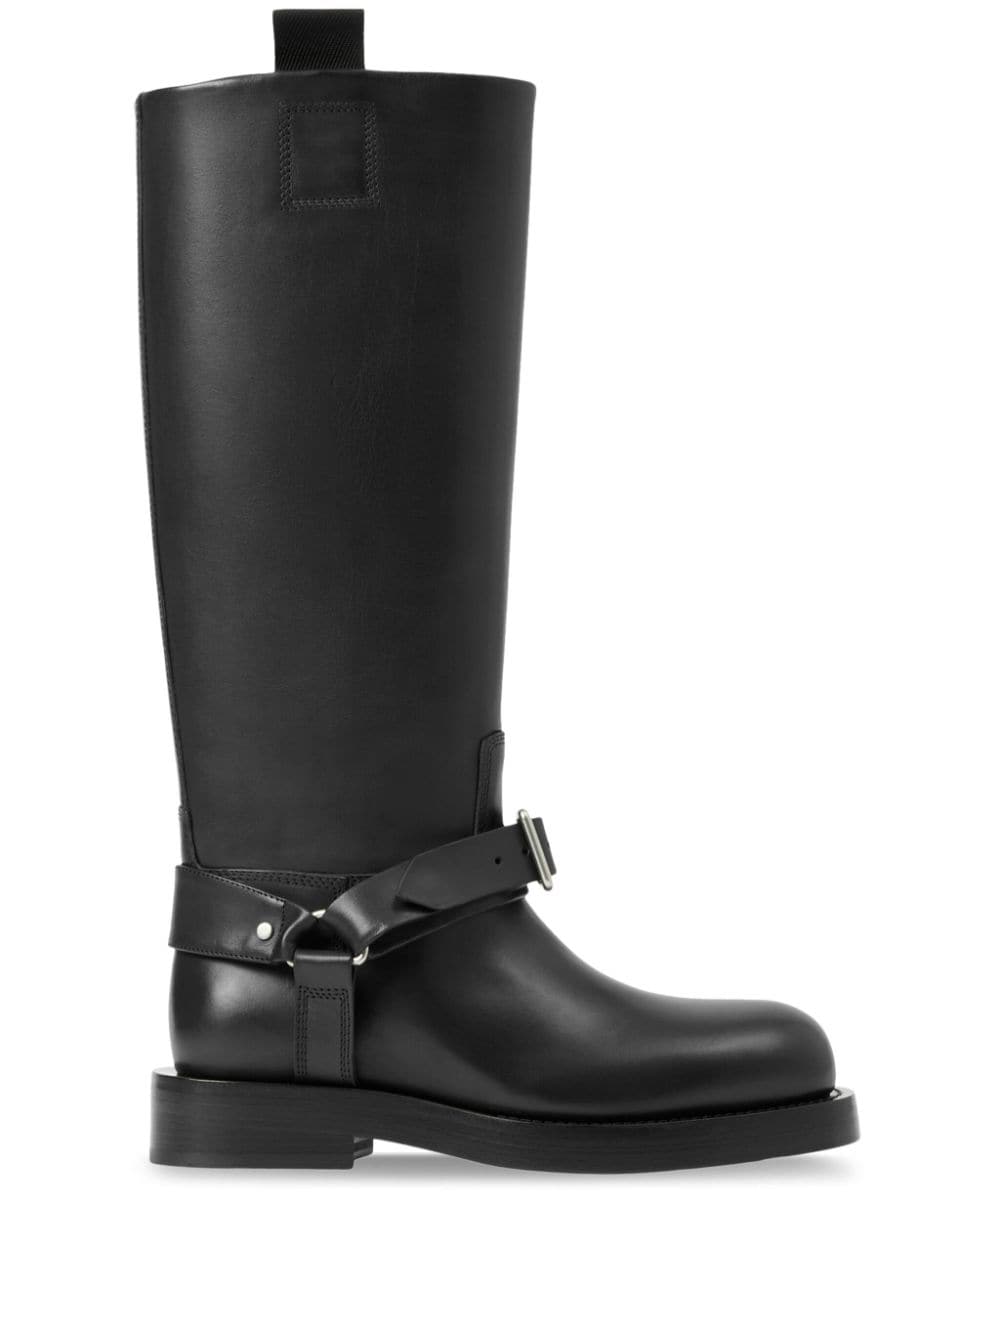 Saddle knee-high leather boots